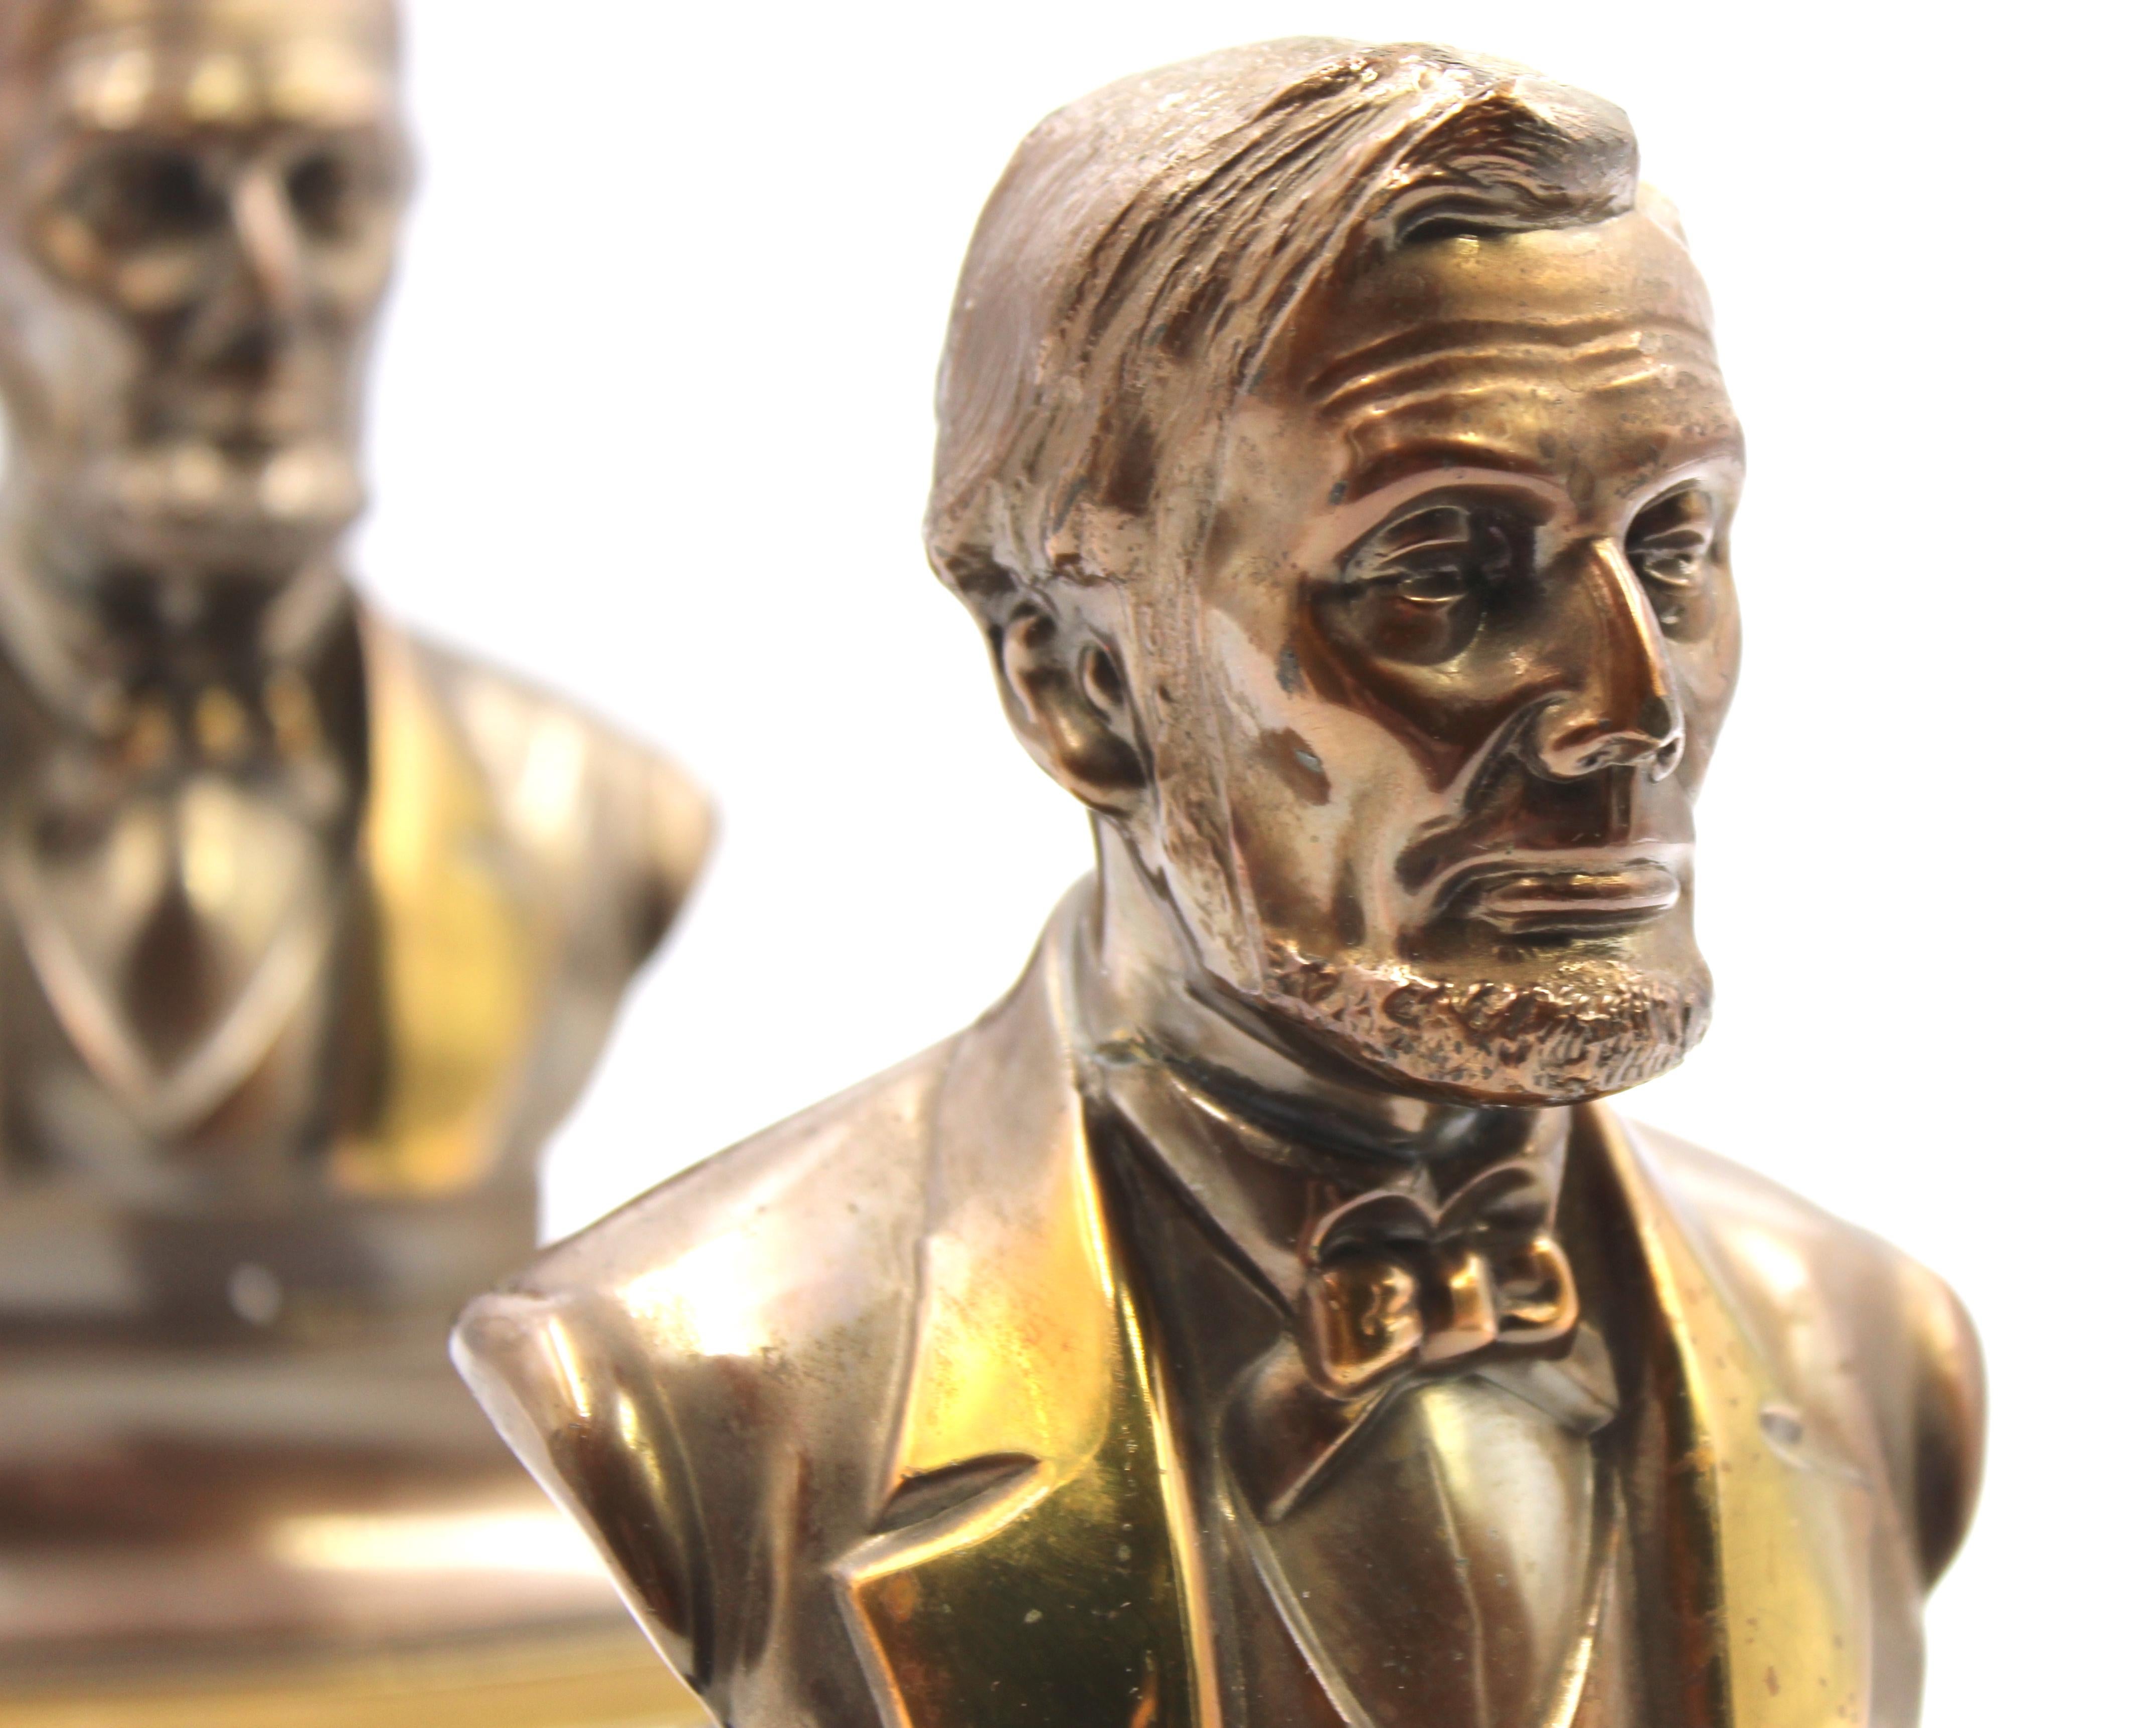 Cast Vintage Abraham Lincoln Bust Bookends by PM American Craftsman